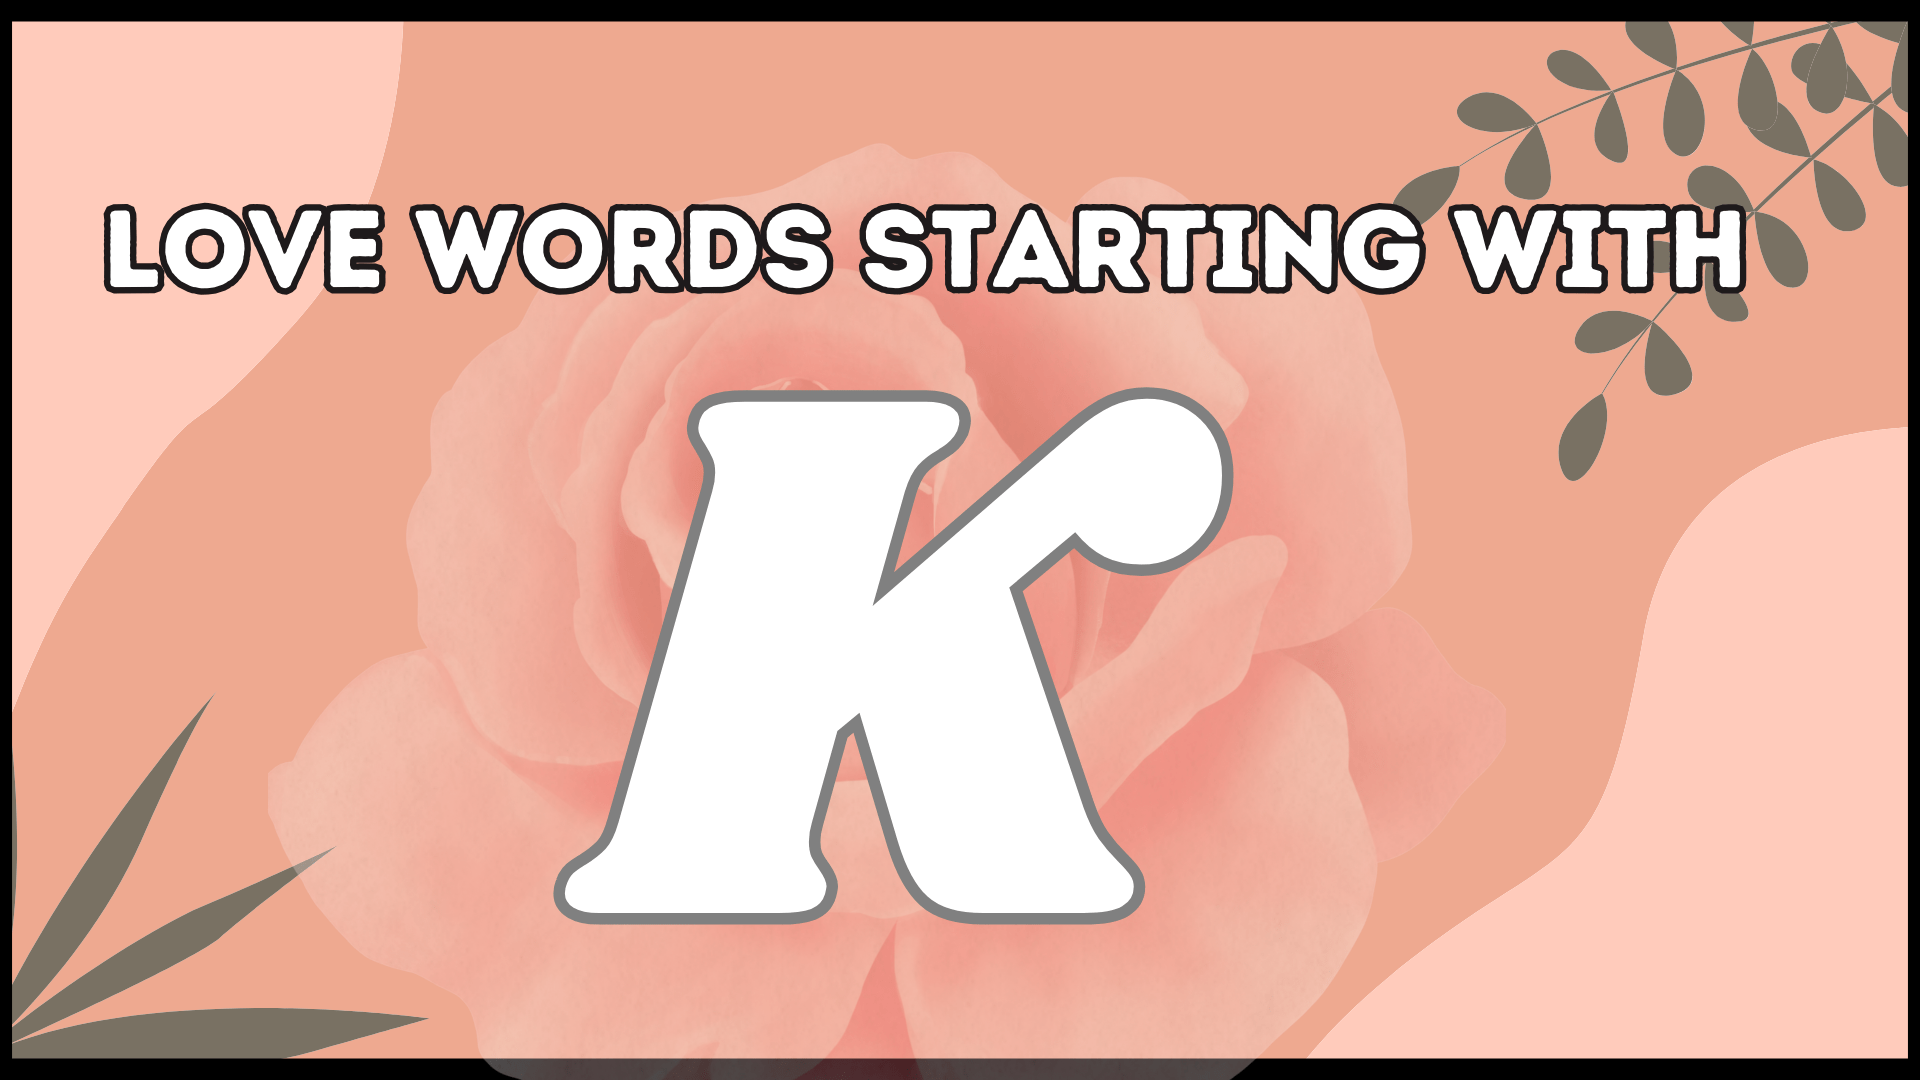 Love Words That Start With K